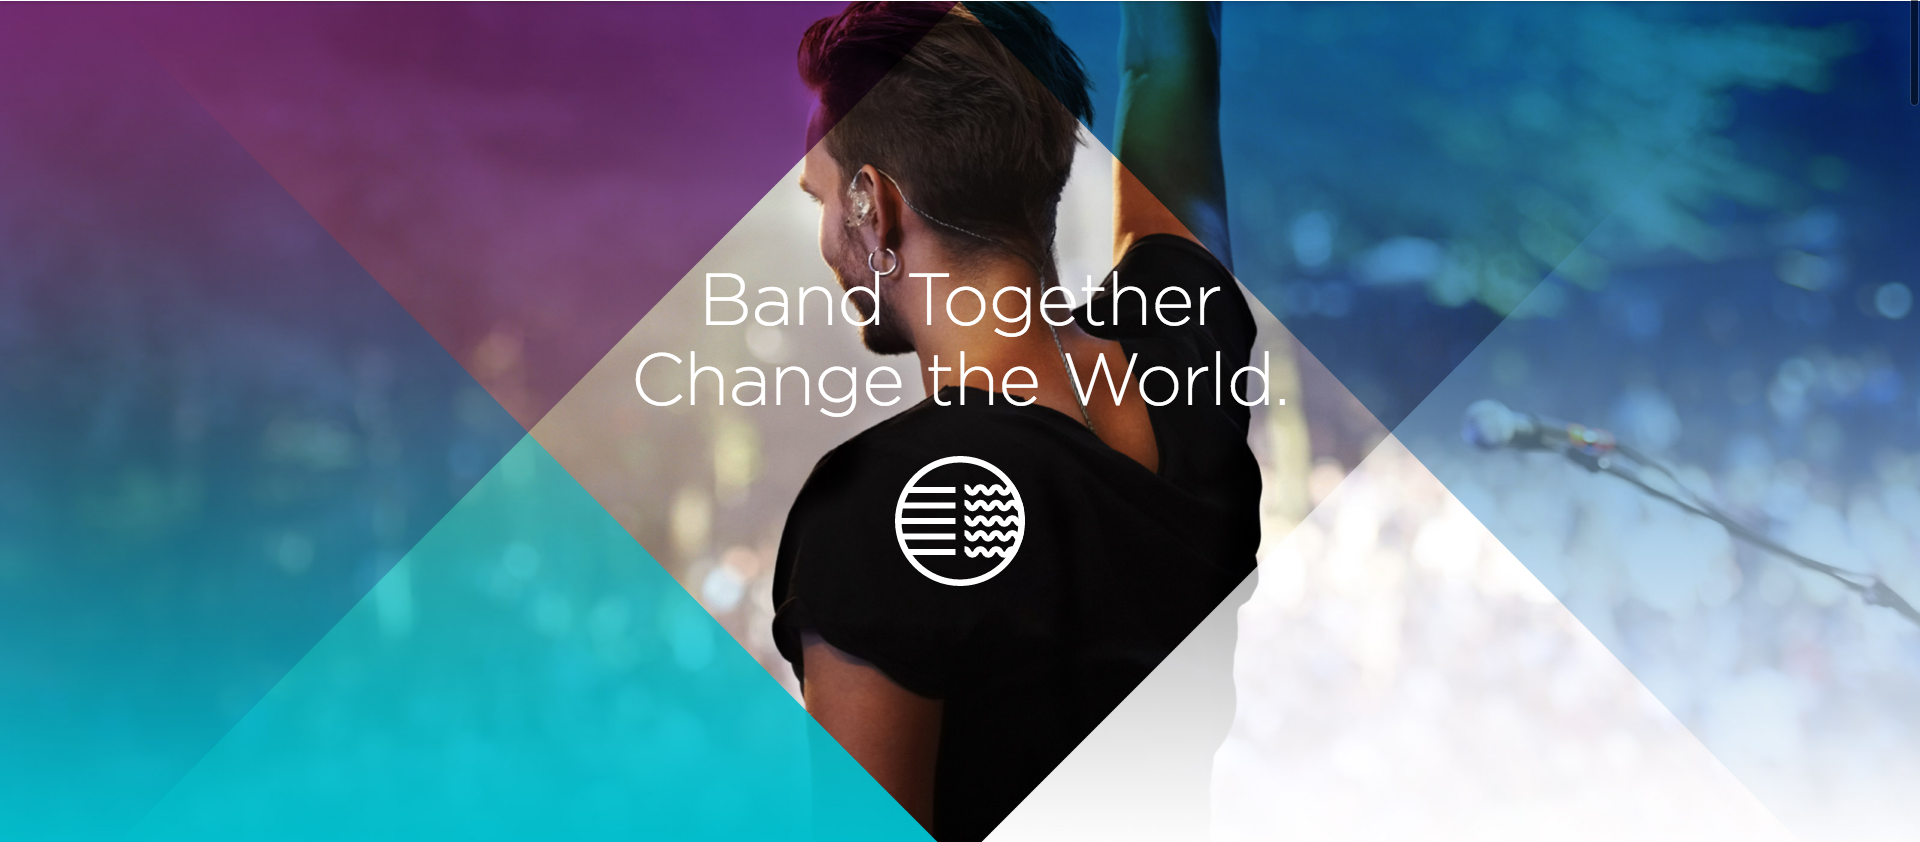 Cadence and Cause, along with 3LAU, are helping music make a difference through charity